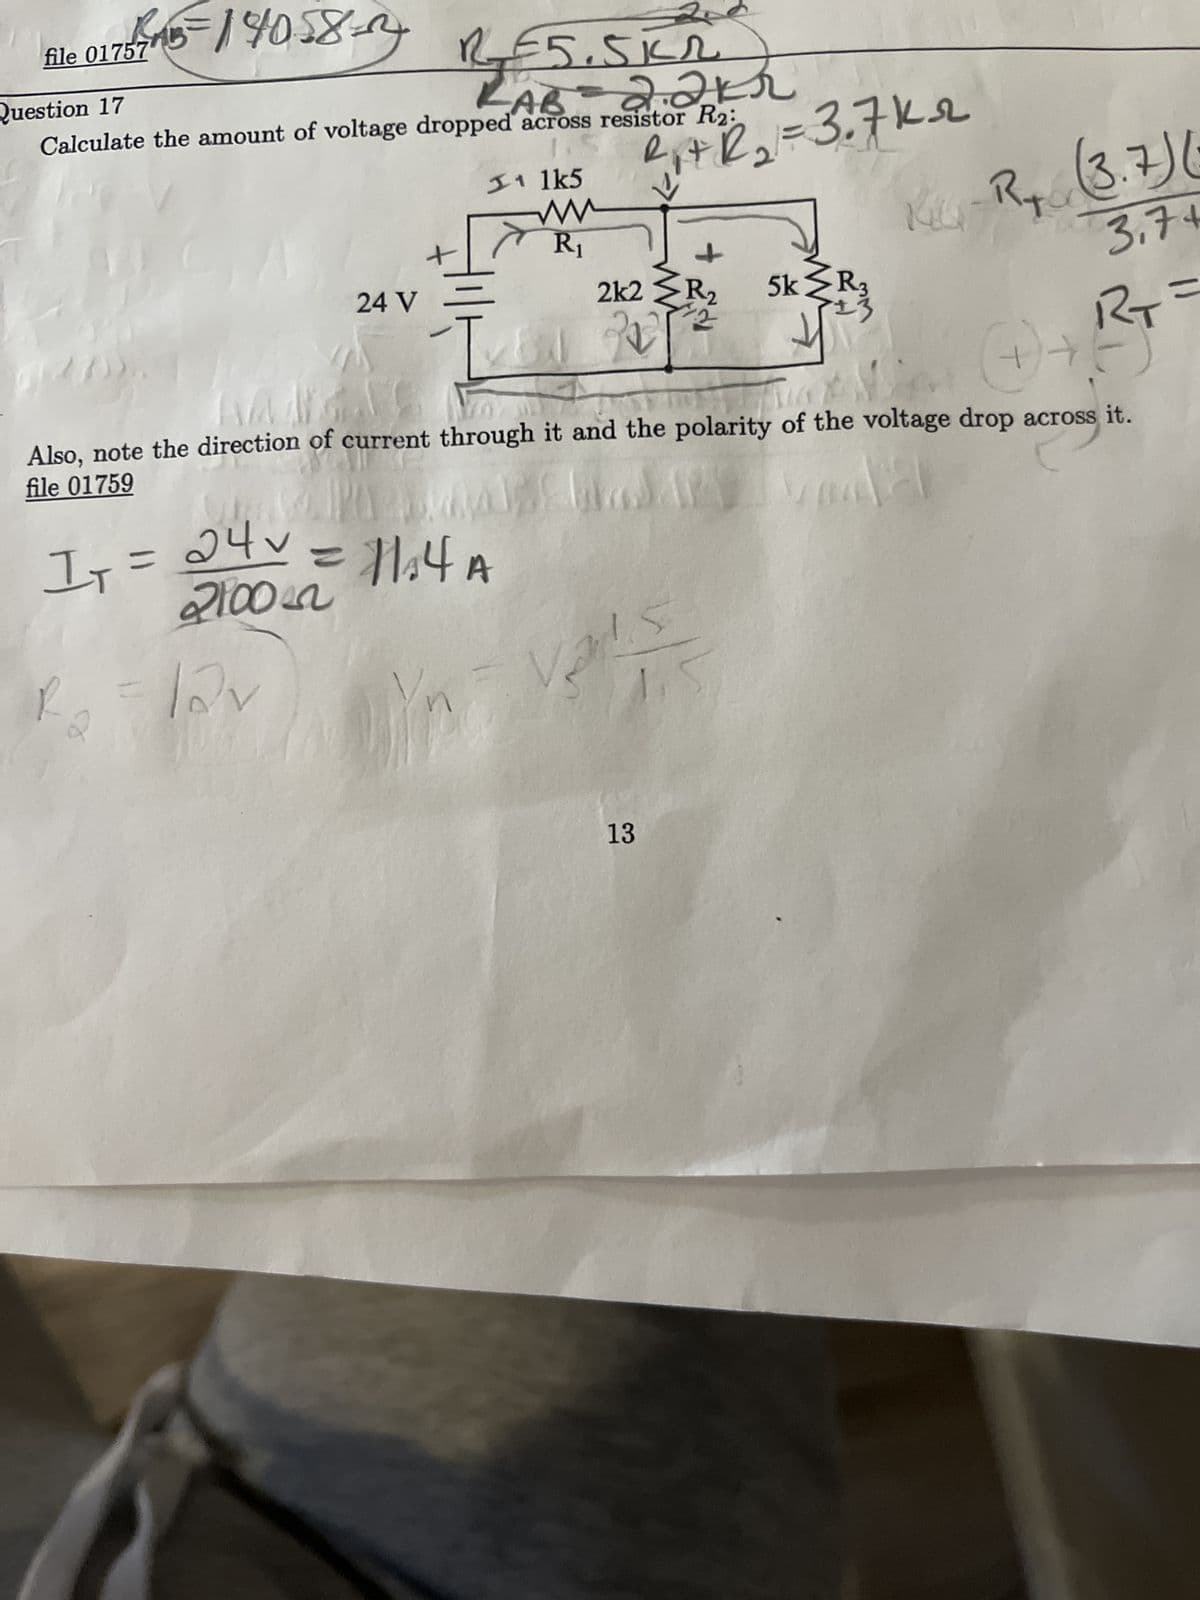 file 017577115=114058-
Question 17
AB
2.211
Calculate the amount of voltage dropped across resistor R2:
#ww
24 V
VISSU
R₁ = lov
11 lk5
f
IT
1₁ = 24V = 11₁4 A
2100
ww
R₁
R₁+R₂ = 3.7k₂
↑
2k2 >R₂
42
Also, note the direction of current through it and the polarity of the voltage drop across it.
file 01759
Van
Mat Chadar
ارحوا
t
1.5
13
5k >R3
R₁ (3.7)
3.74
RT=
BI
(+) + !